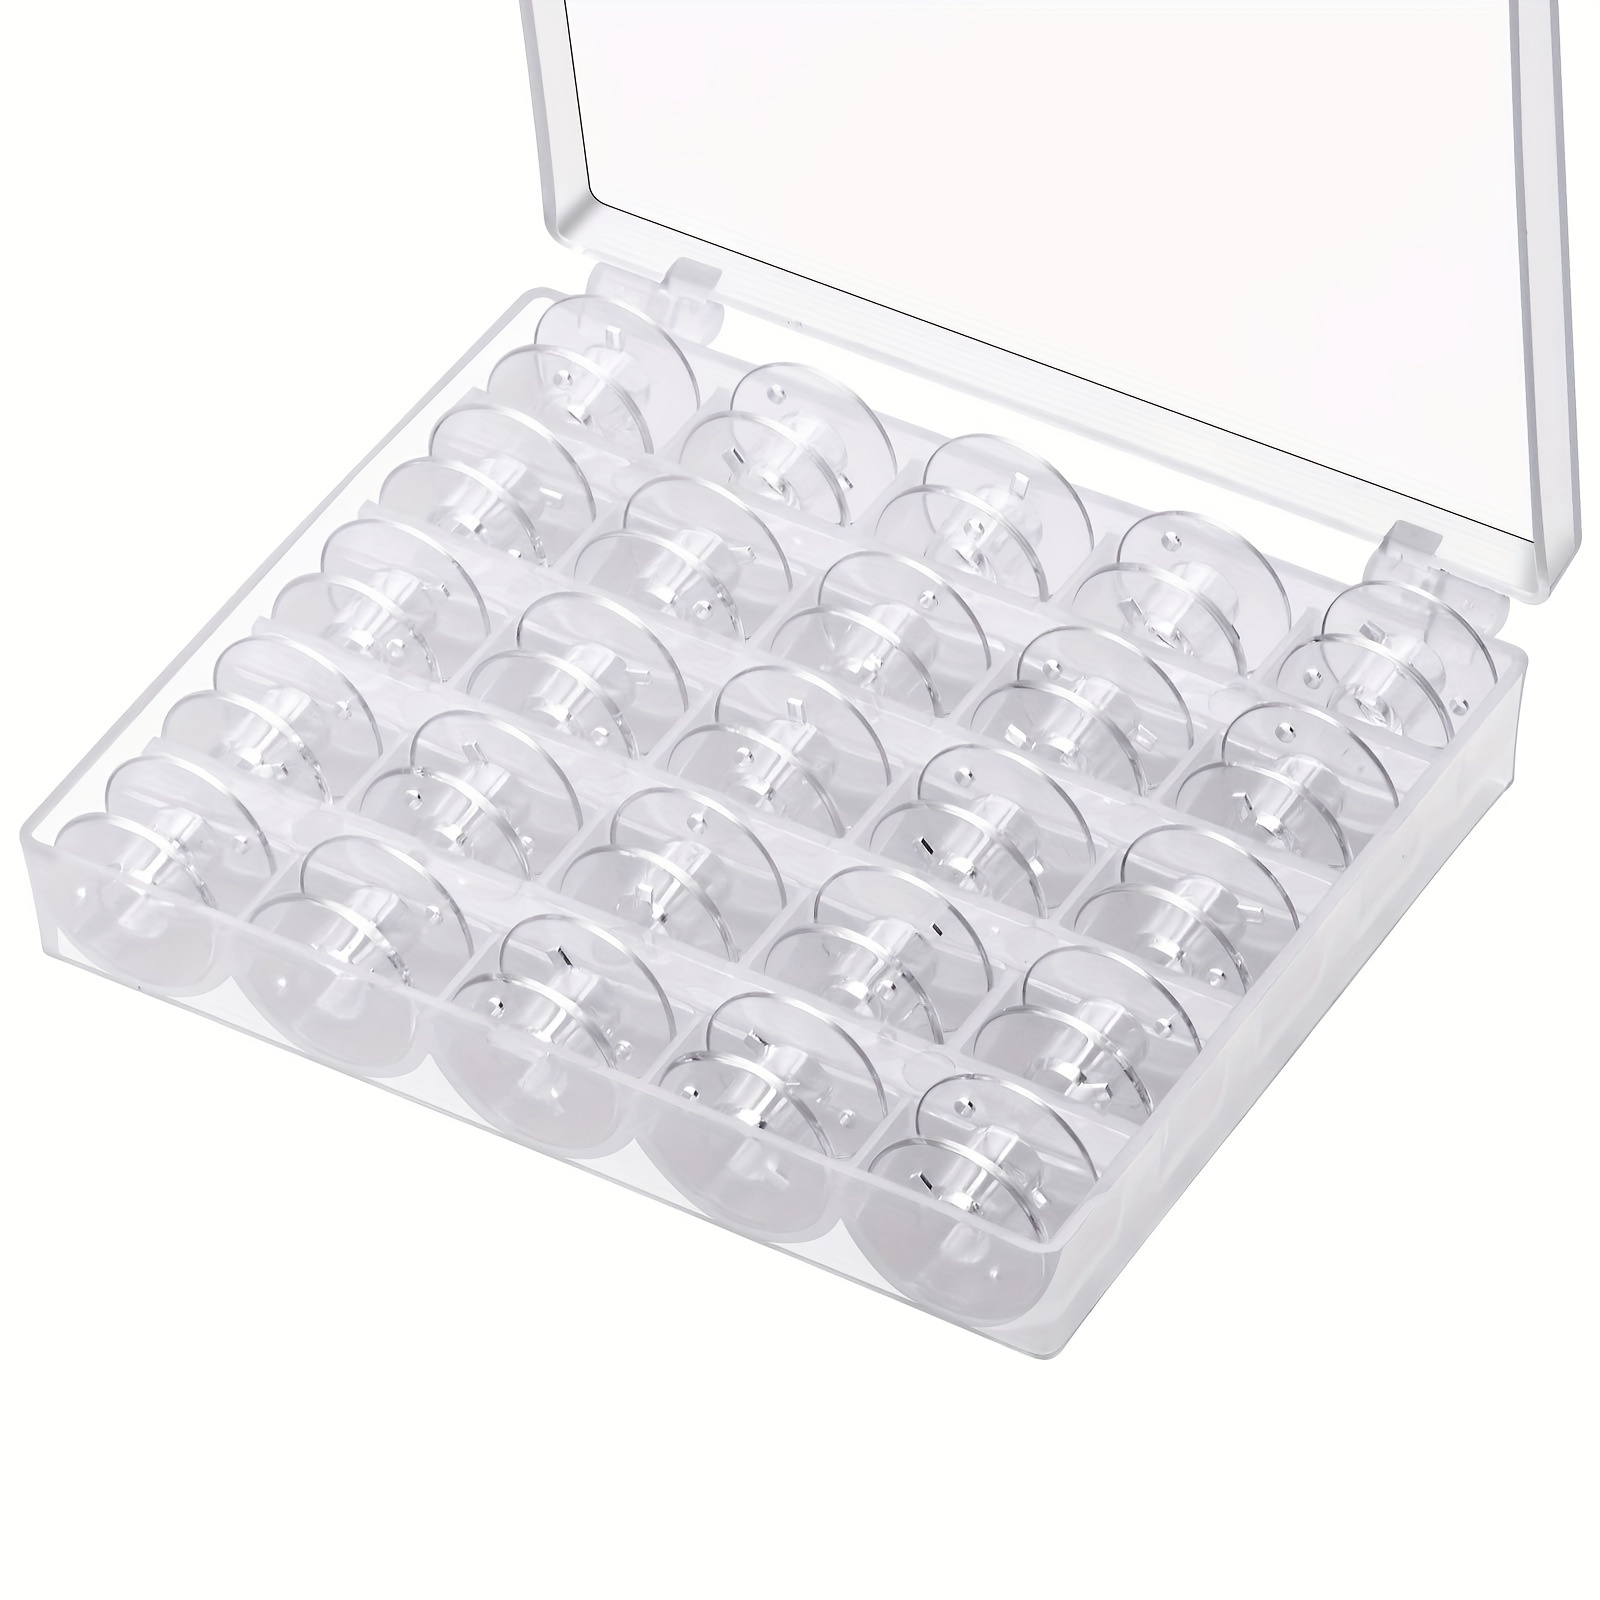 50 Pack Clear Plastic Sewing Machine Bobbins Class 15, Sewing Bobbins  Compatible For Brother Singer Janome Kenmore Machines Style SA156  Transparent Bo